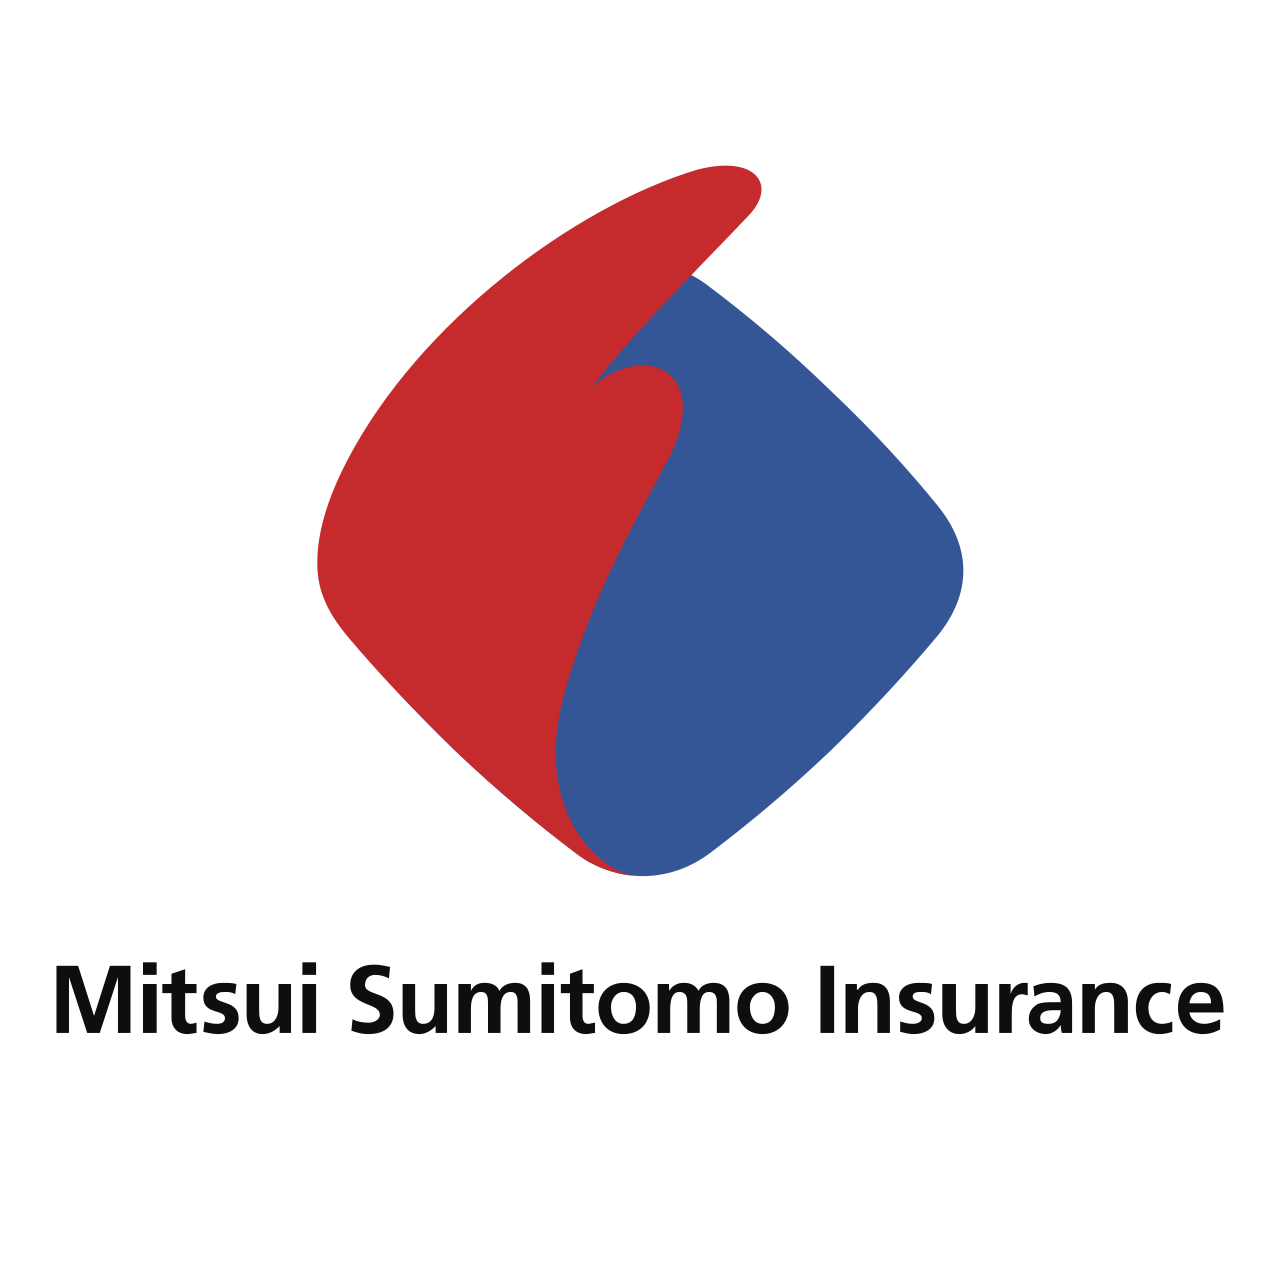 Mitsui Sumitomo Insurance. Information about the issuer. (LEI 5493006KRZ0SJO41LZ83, SWIFT MISRJPJ1XXX). News and credit ratings. Tables with accounting and financial reports.